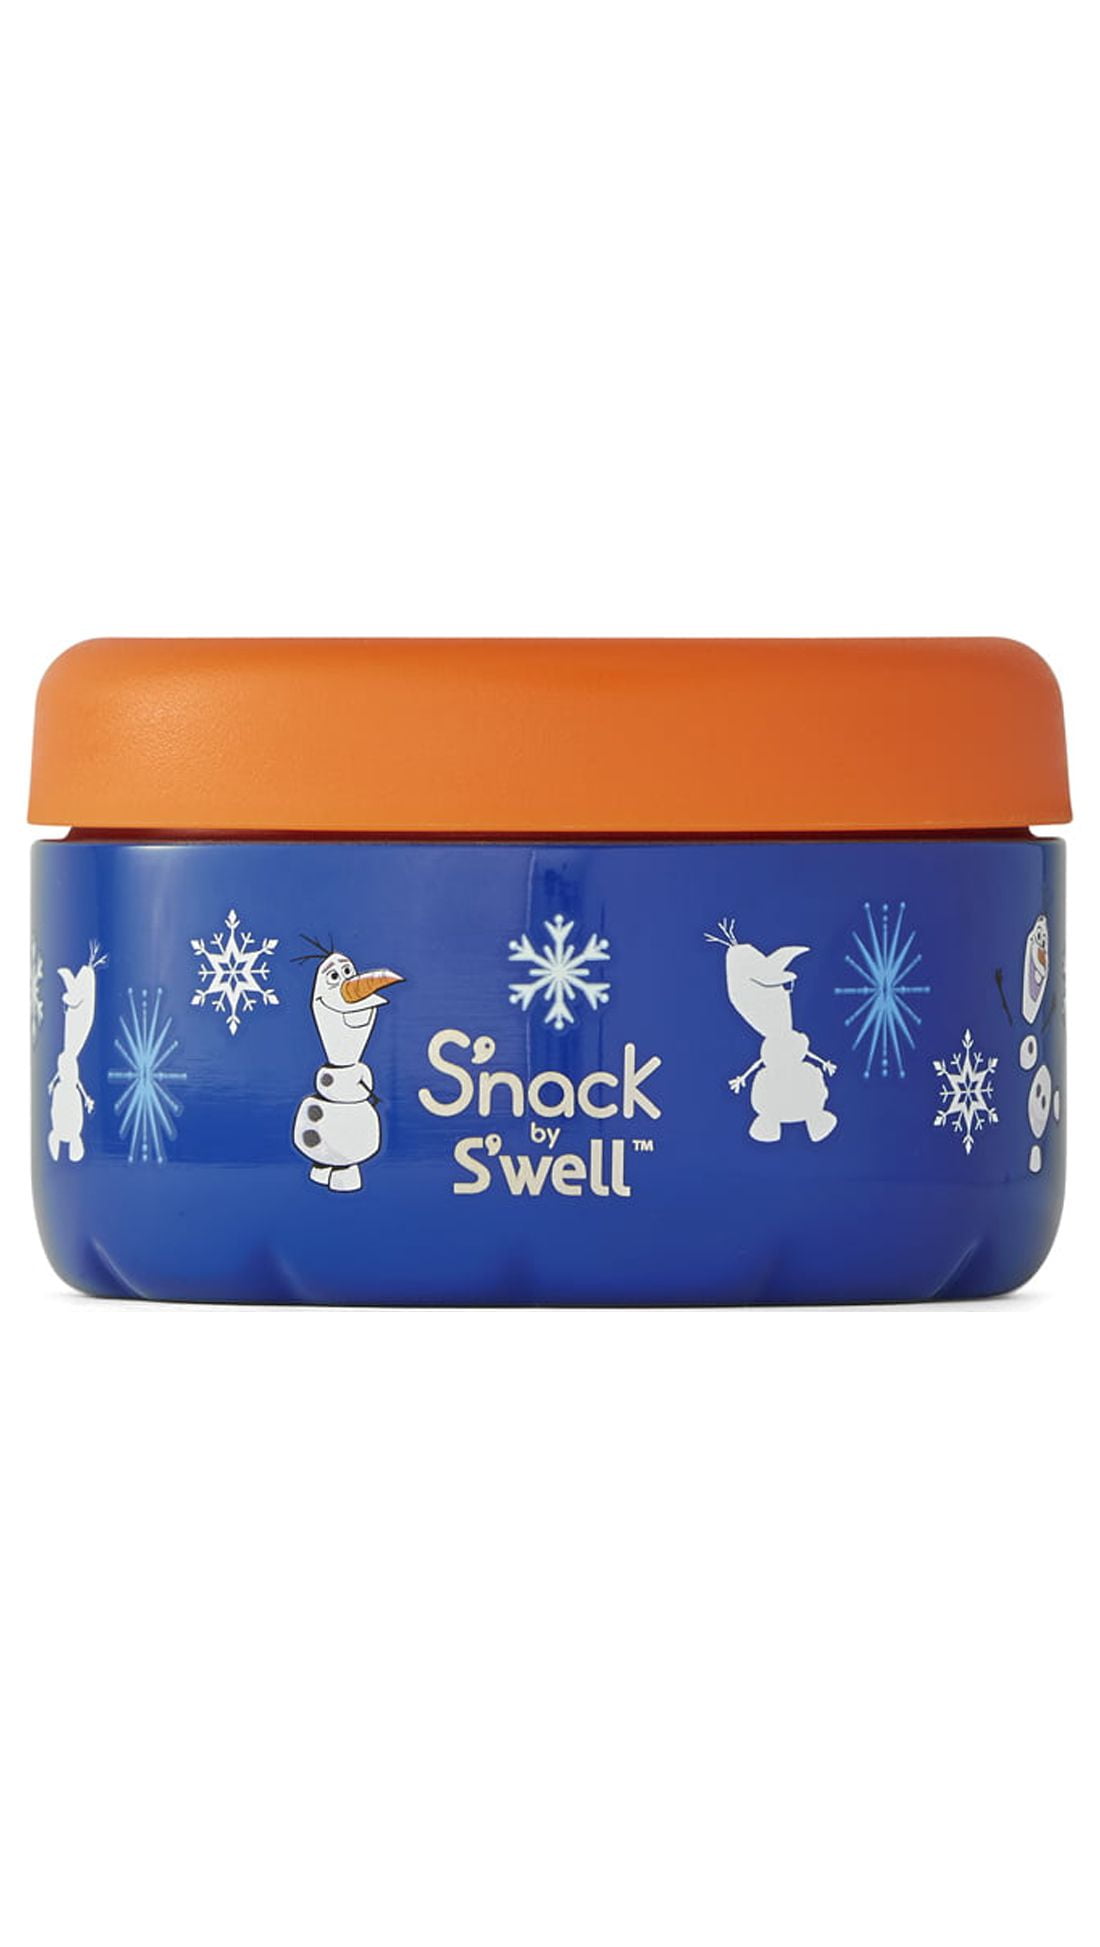 New S'well S'nack containers just made lunch time more S'tylish.